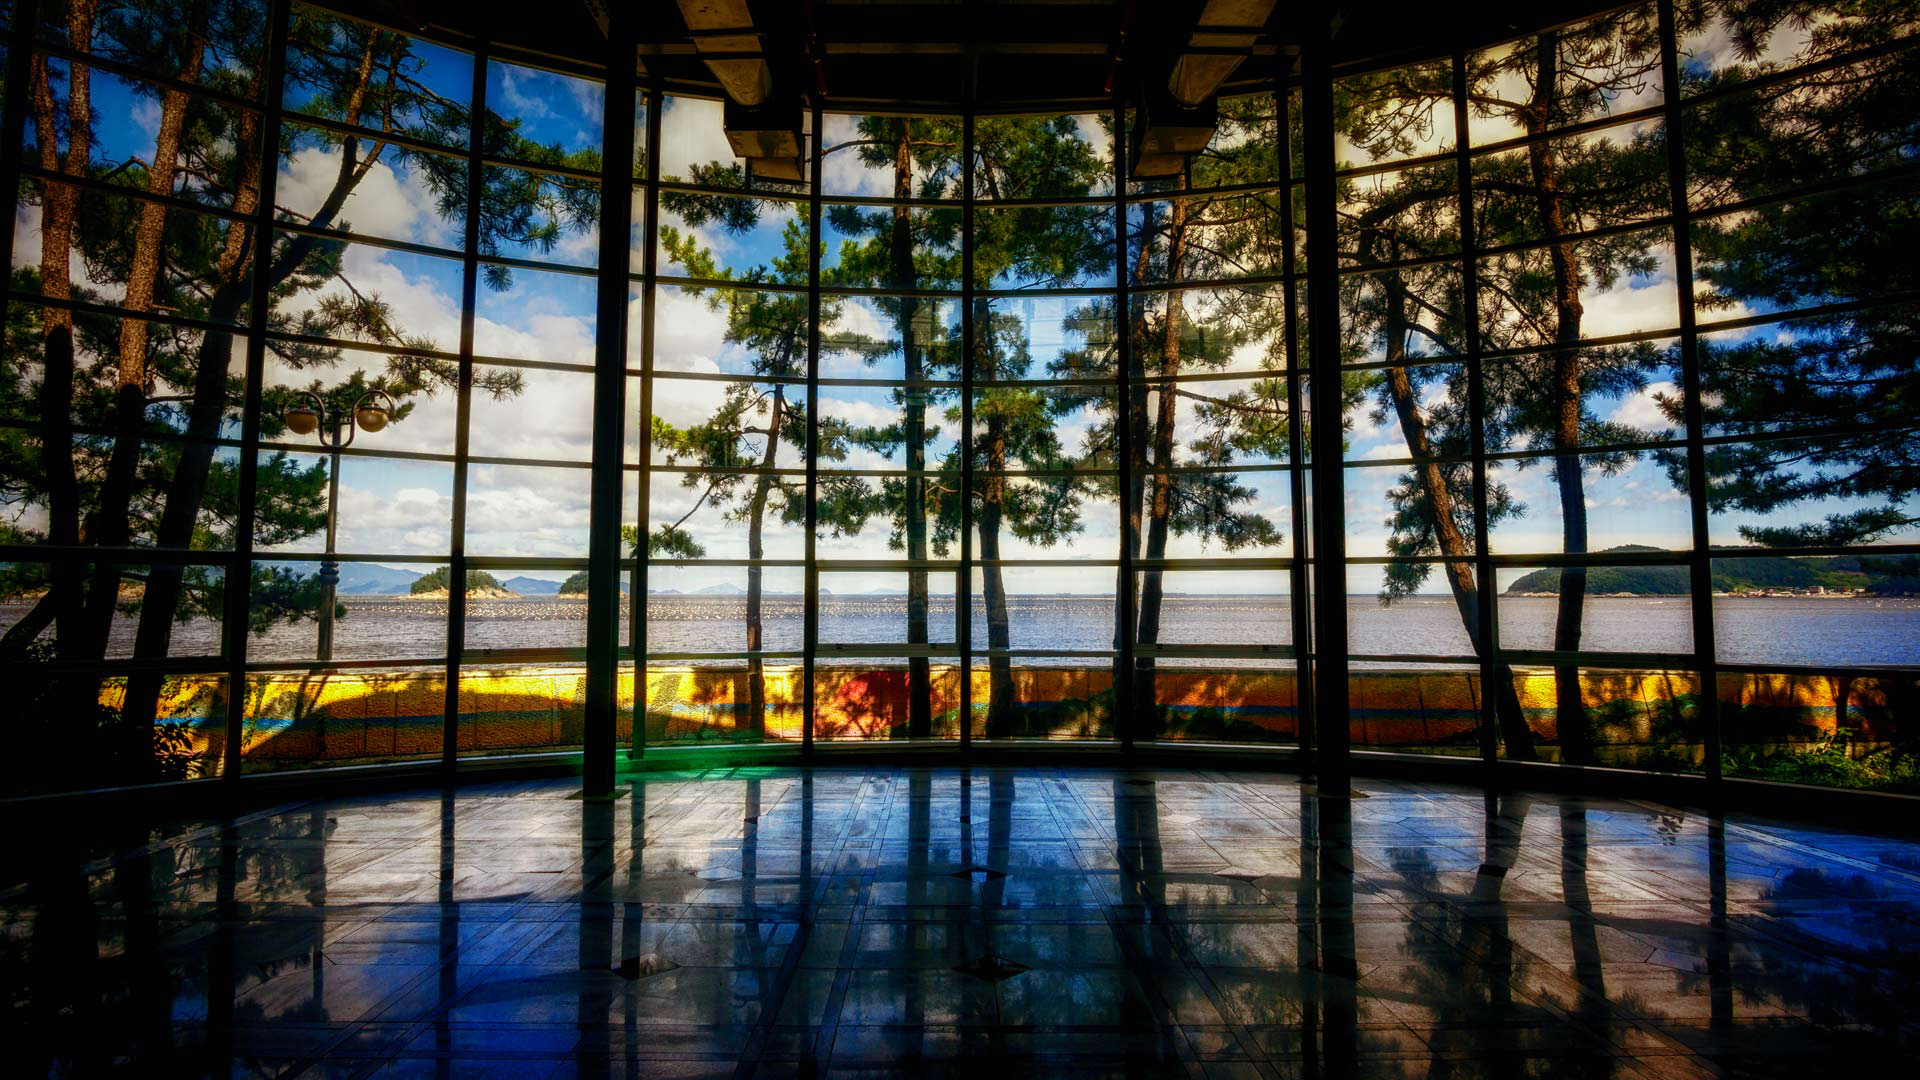 man made, window, forest, museum